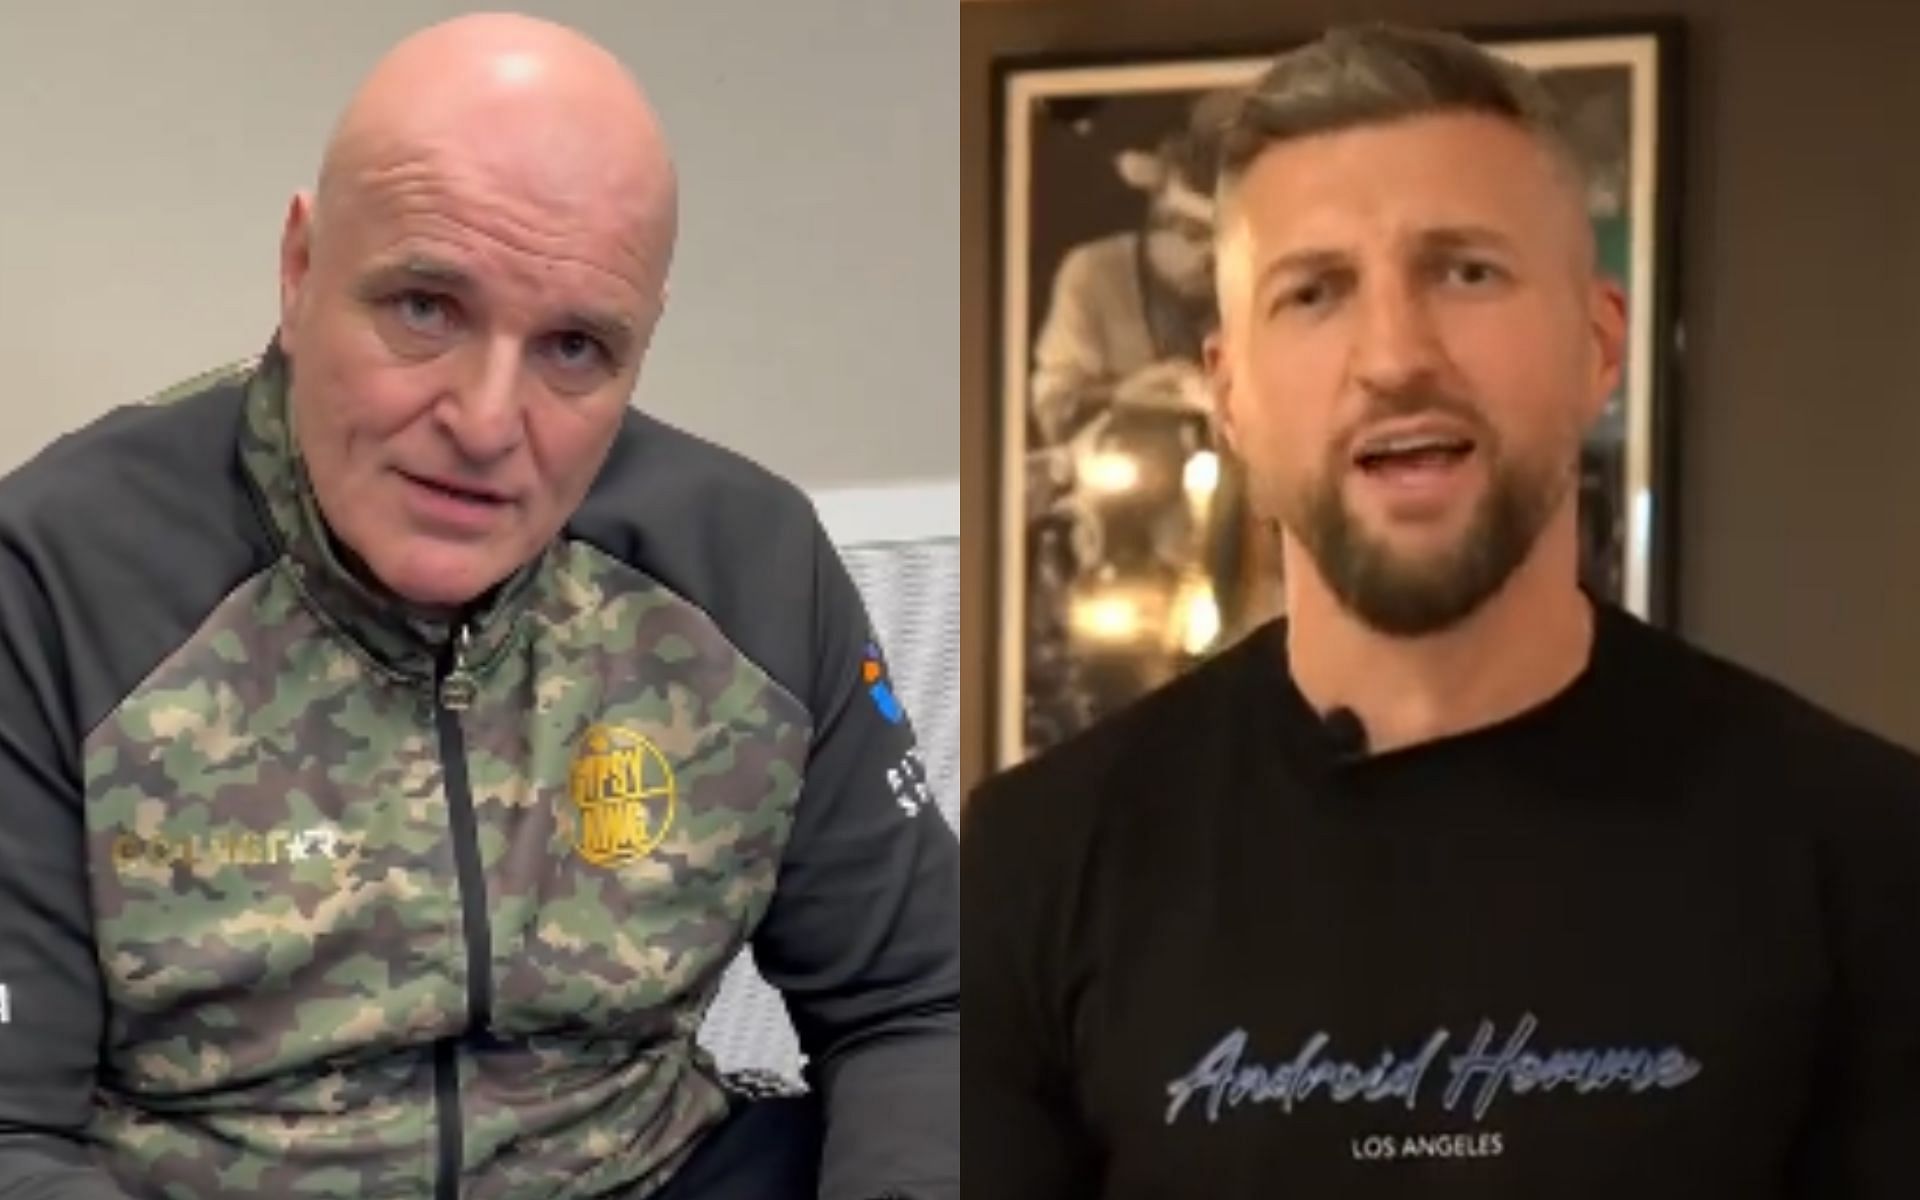 John Fury [Left] shares impassioned callout for a fight [Carl Froch, Right] [Image courtesy: @GypsyJohnFury_ and @Carl_Froch - X]